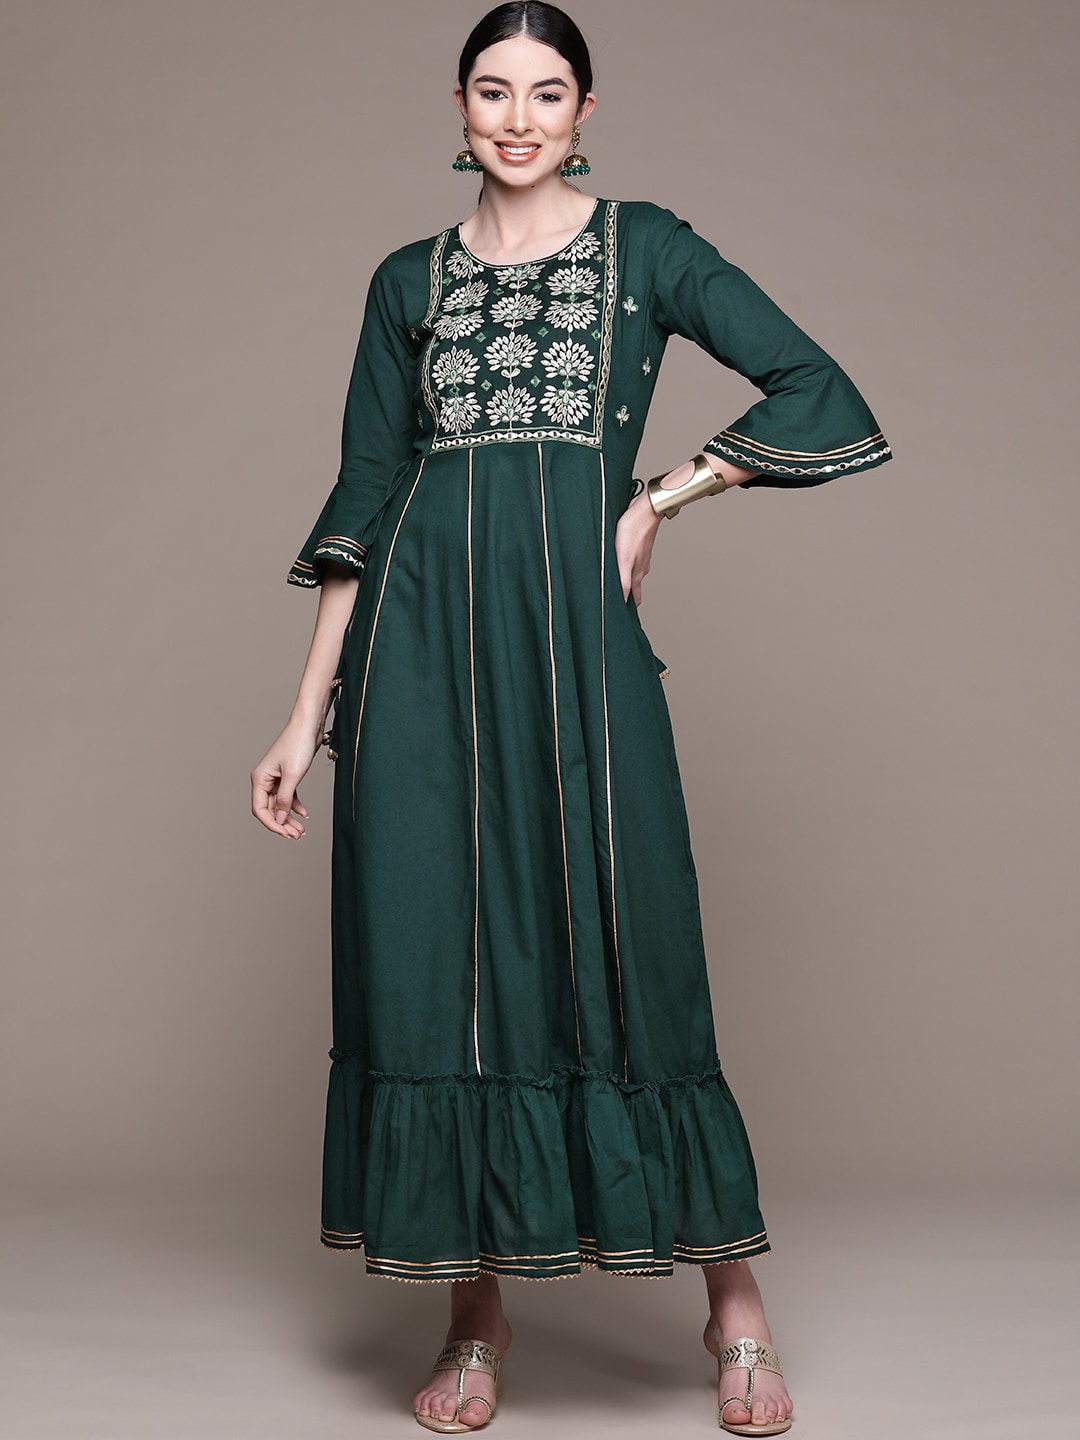 Anubhutee Green Embellished Embroidered Ethnic Cotton A-Line Maxi Dress Price in India